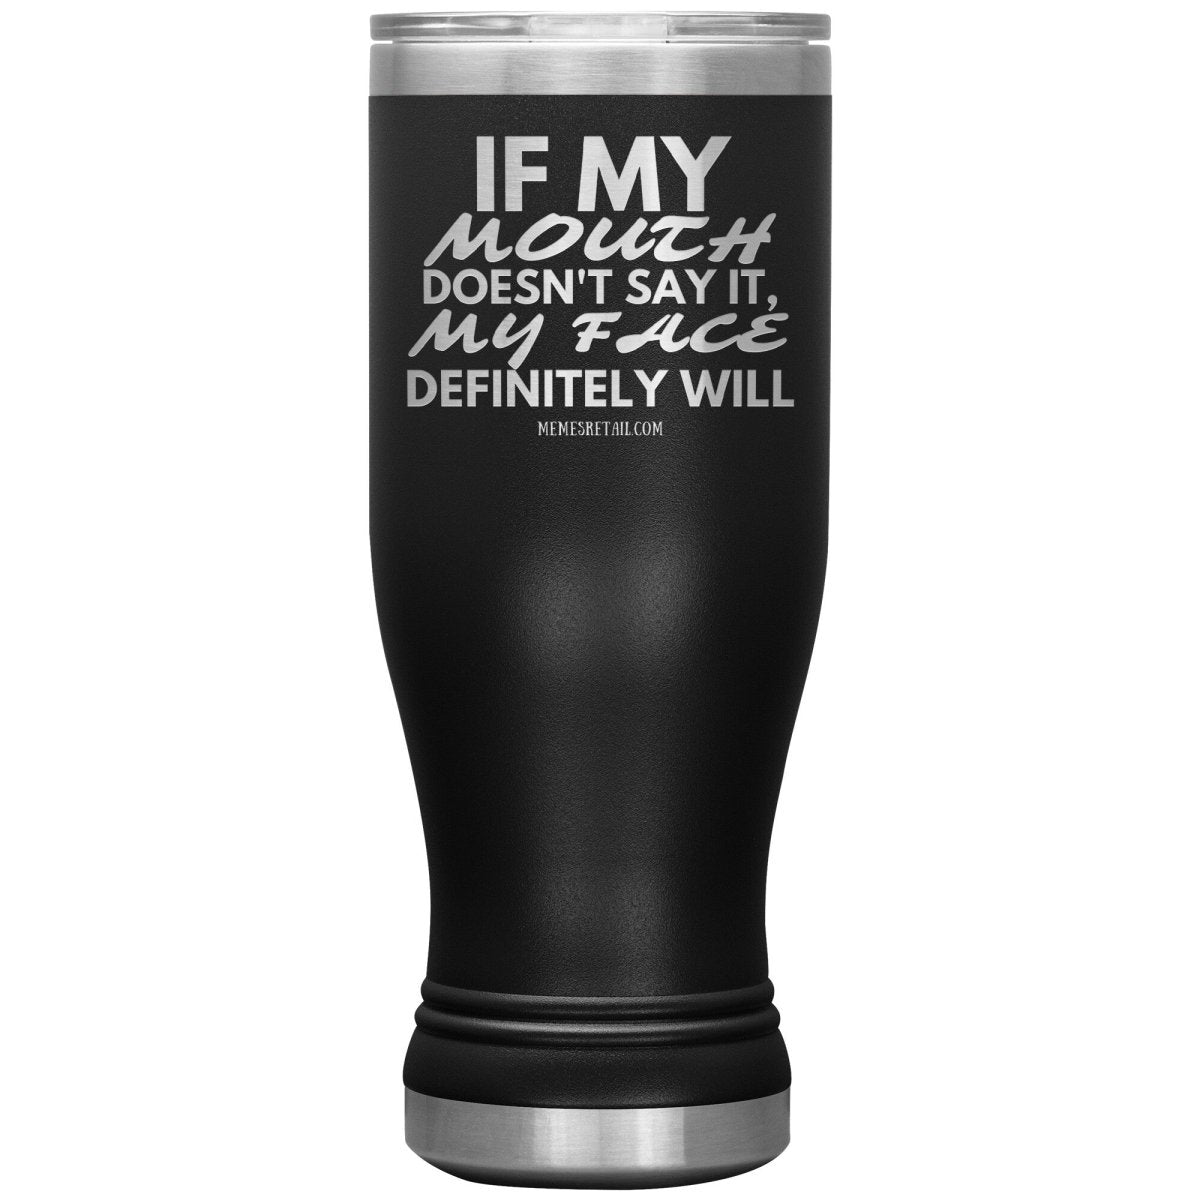 If my mouth doesn't say it, my face definitely will Tumblers, 20oz BOHO Insulated Tumbler / Black - MemesRetail.com